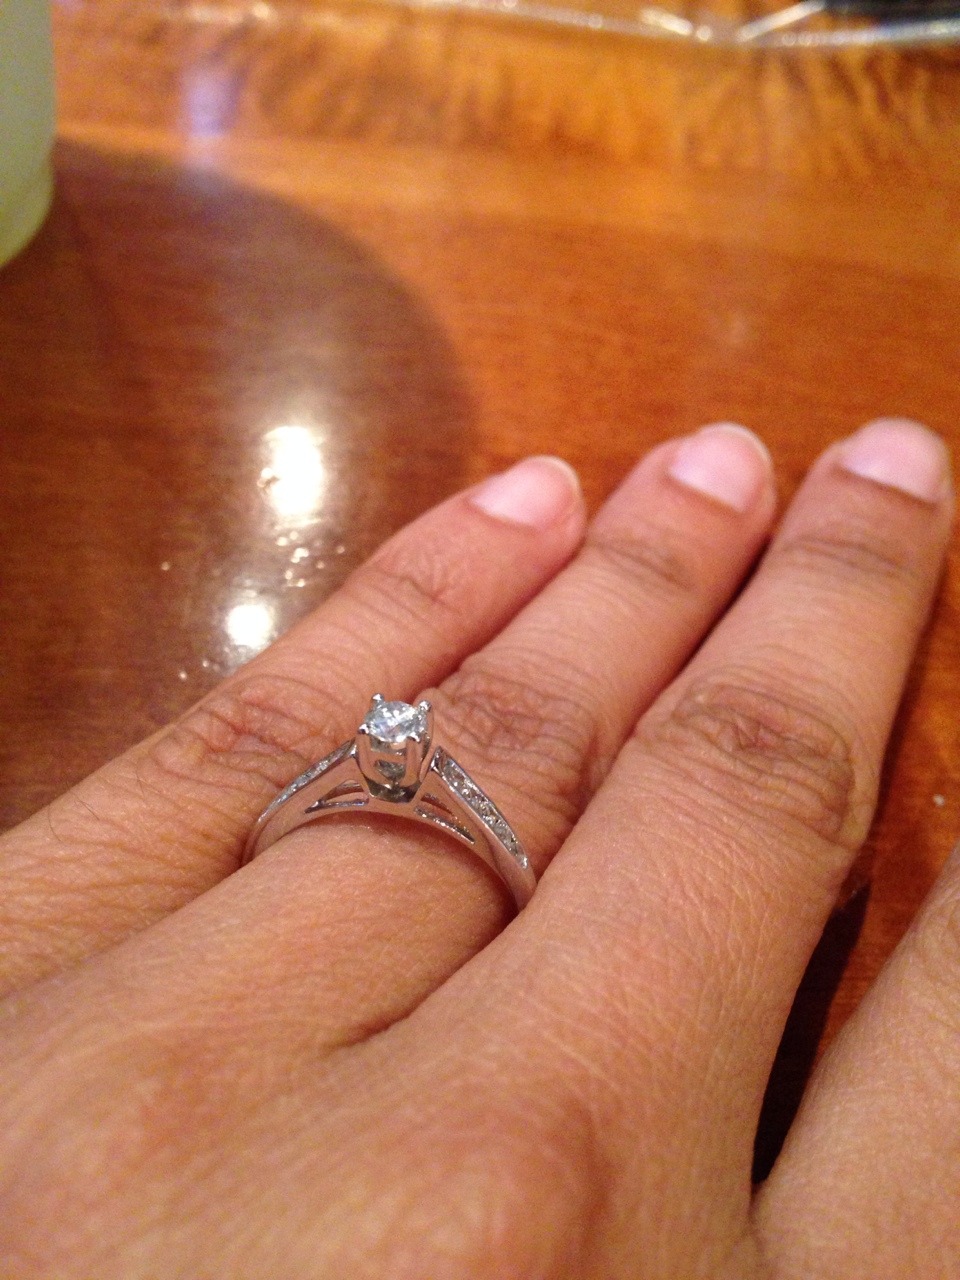 bsusy:  Today my best friend and the love of my life proposed to me in Chicago after